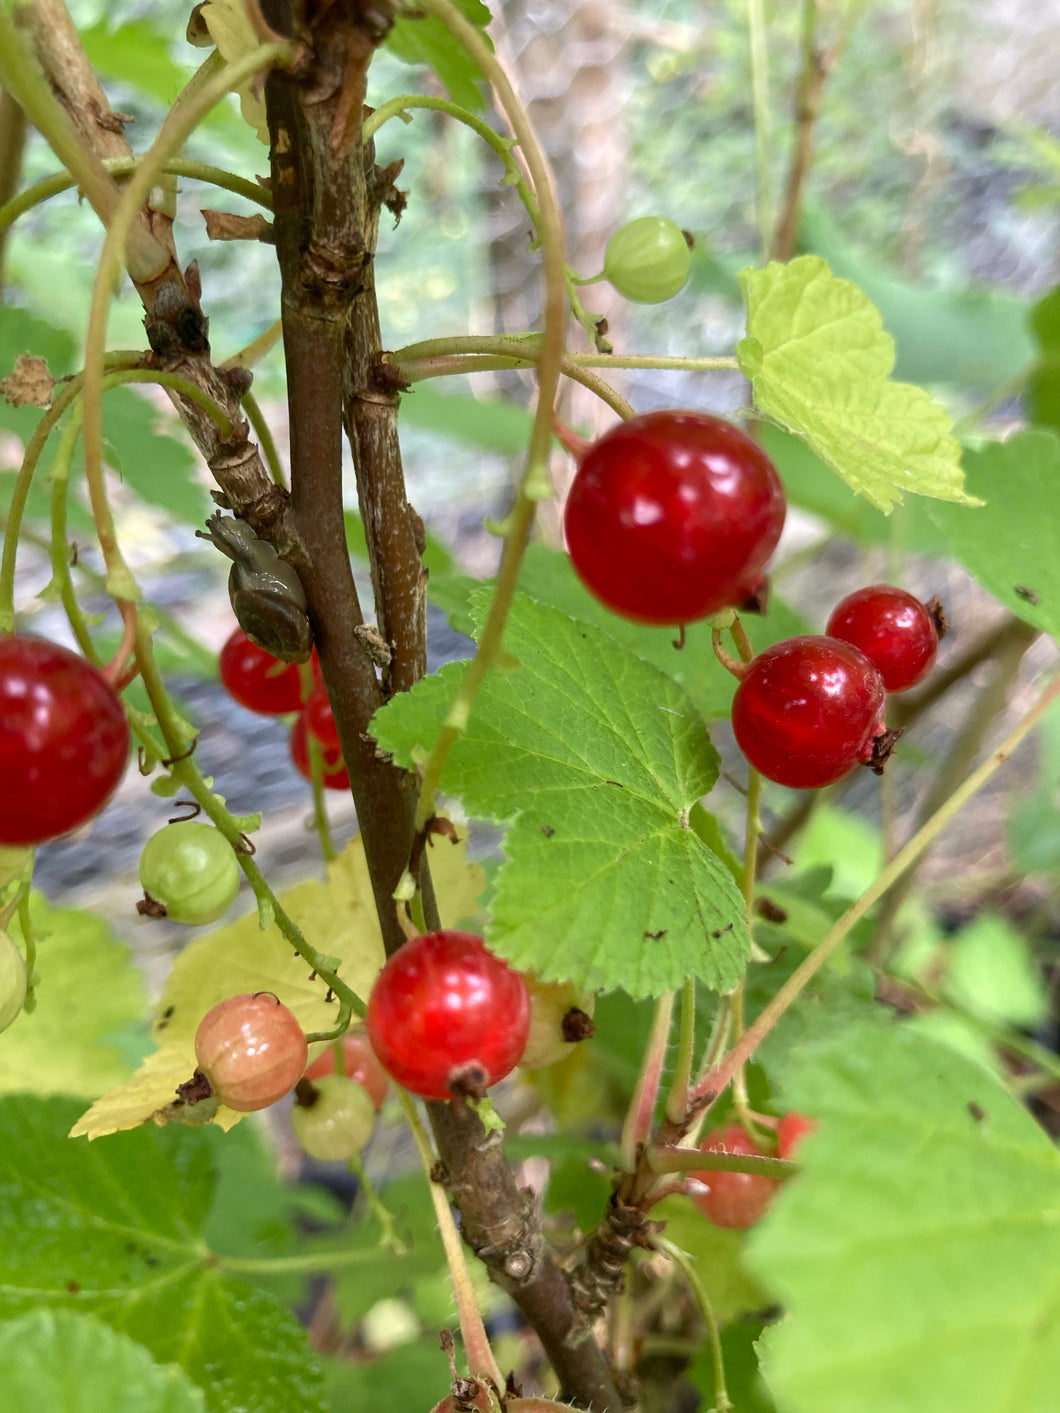 2 plugs/young transplants of Redcurrant for Grow-Your-Own Includes Postage